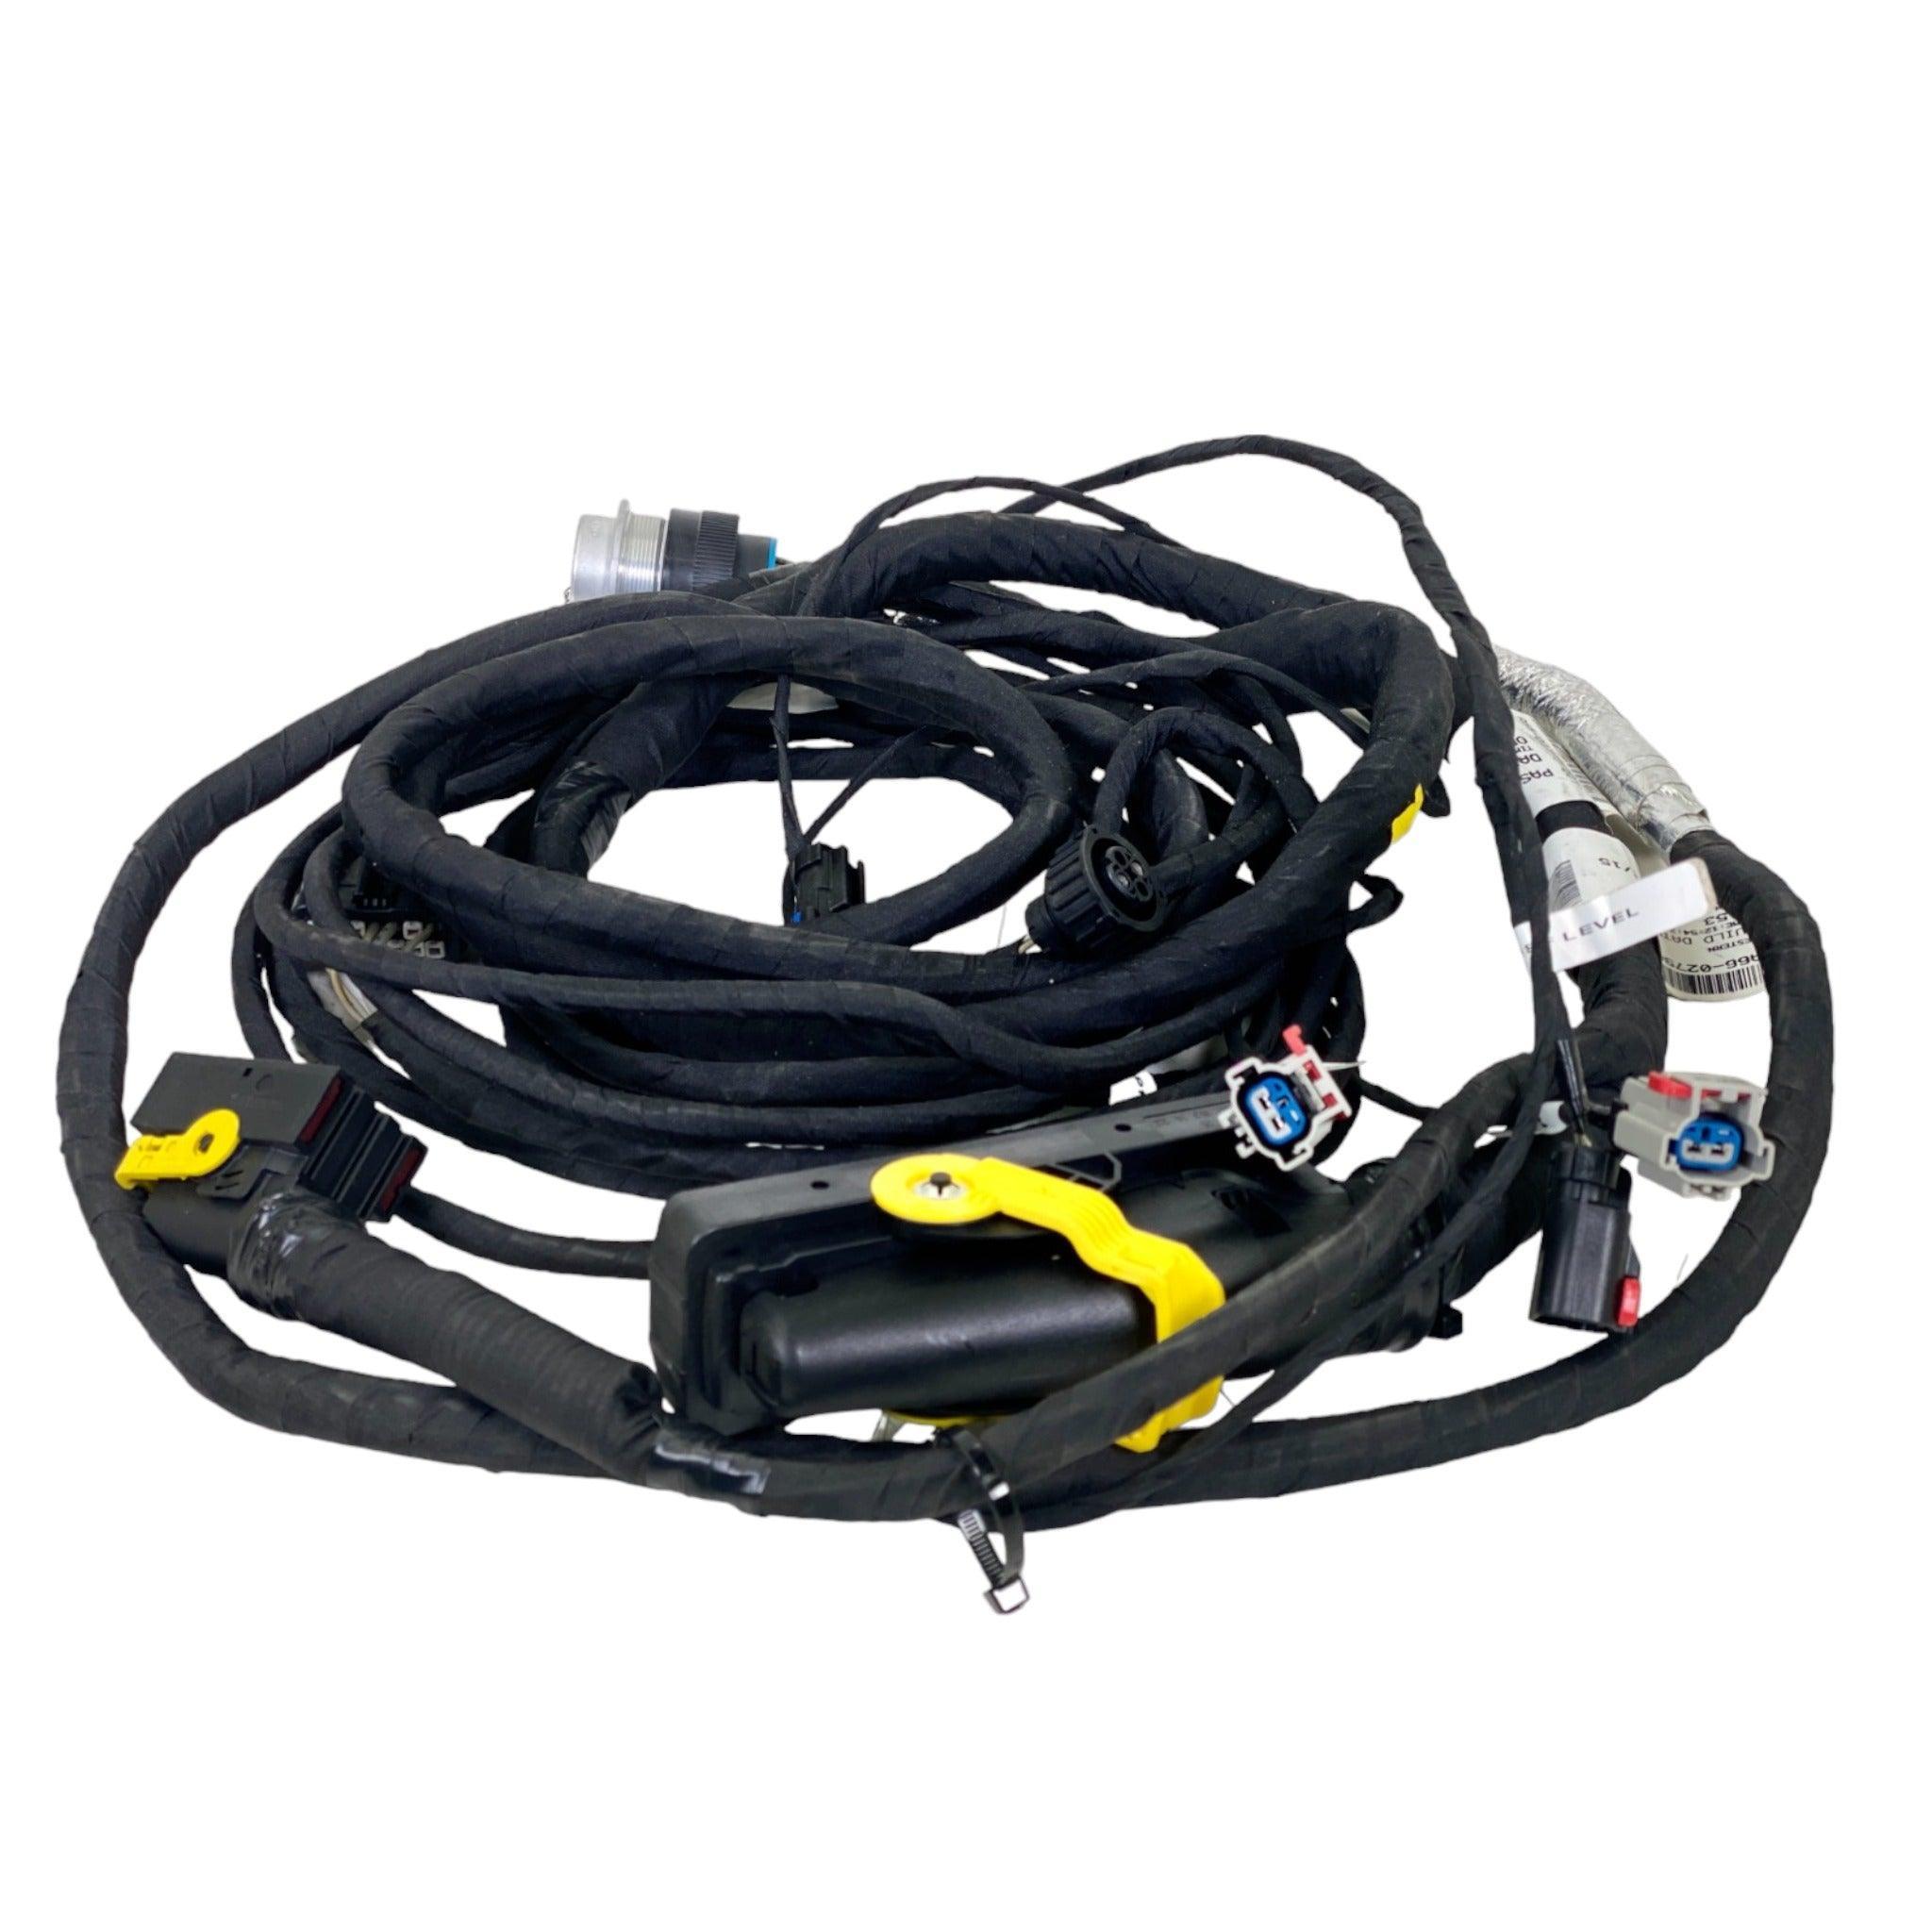 A06-82139-001 Genuine Freightliner® Kit Harness Ats - ADVANCED TRUCK PARTS